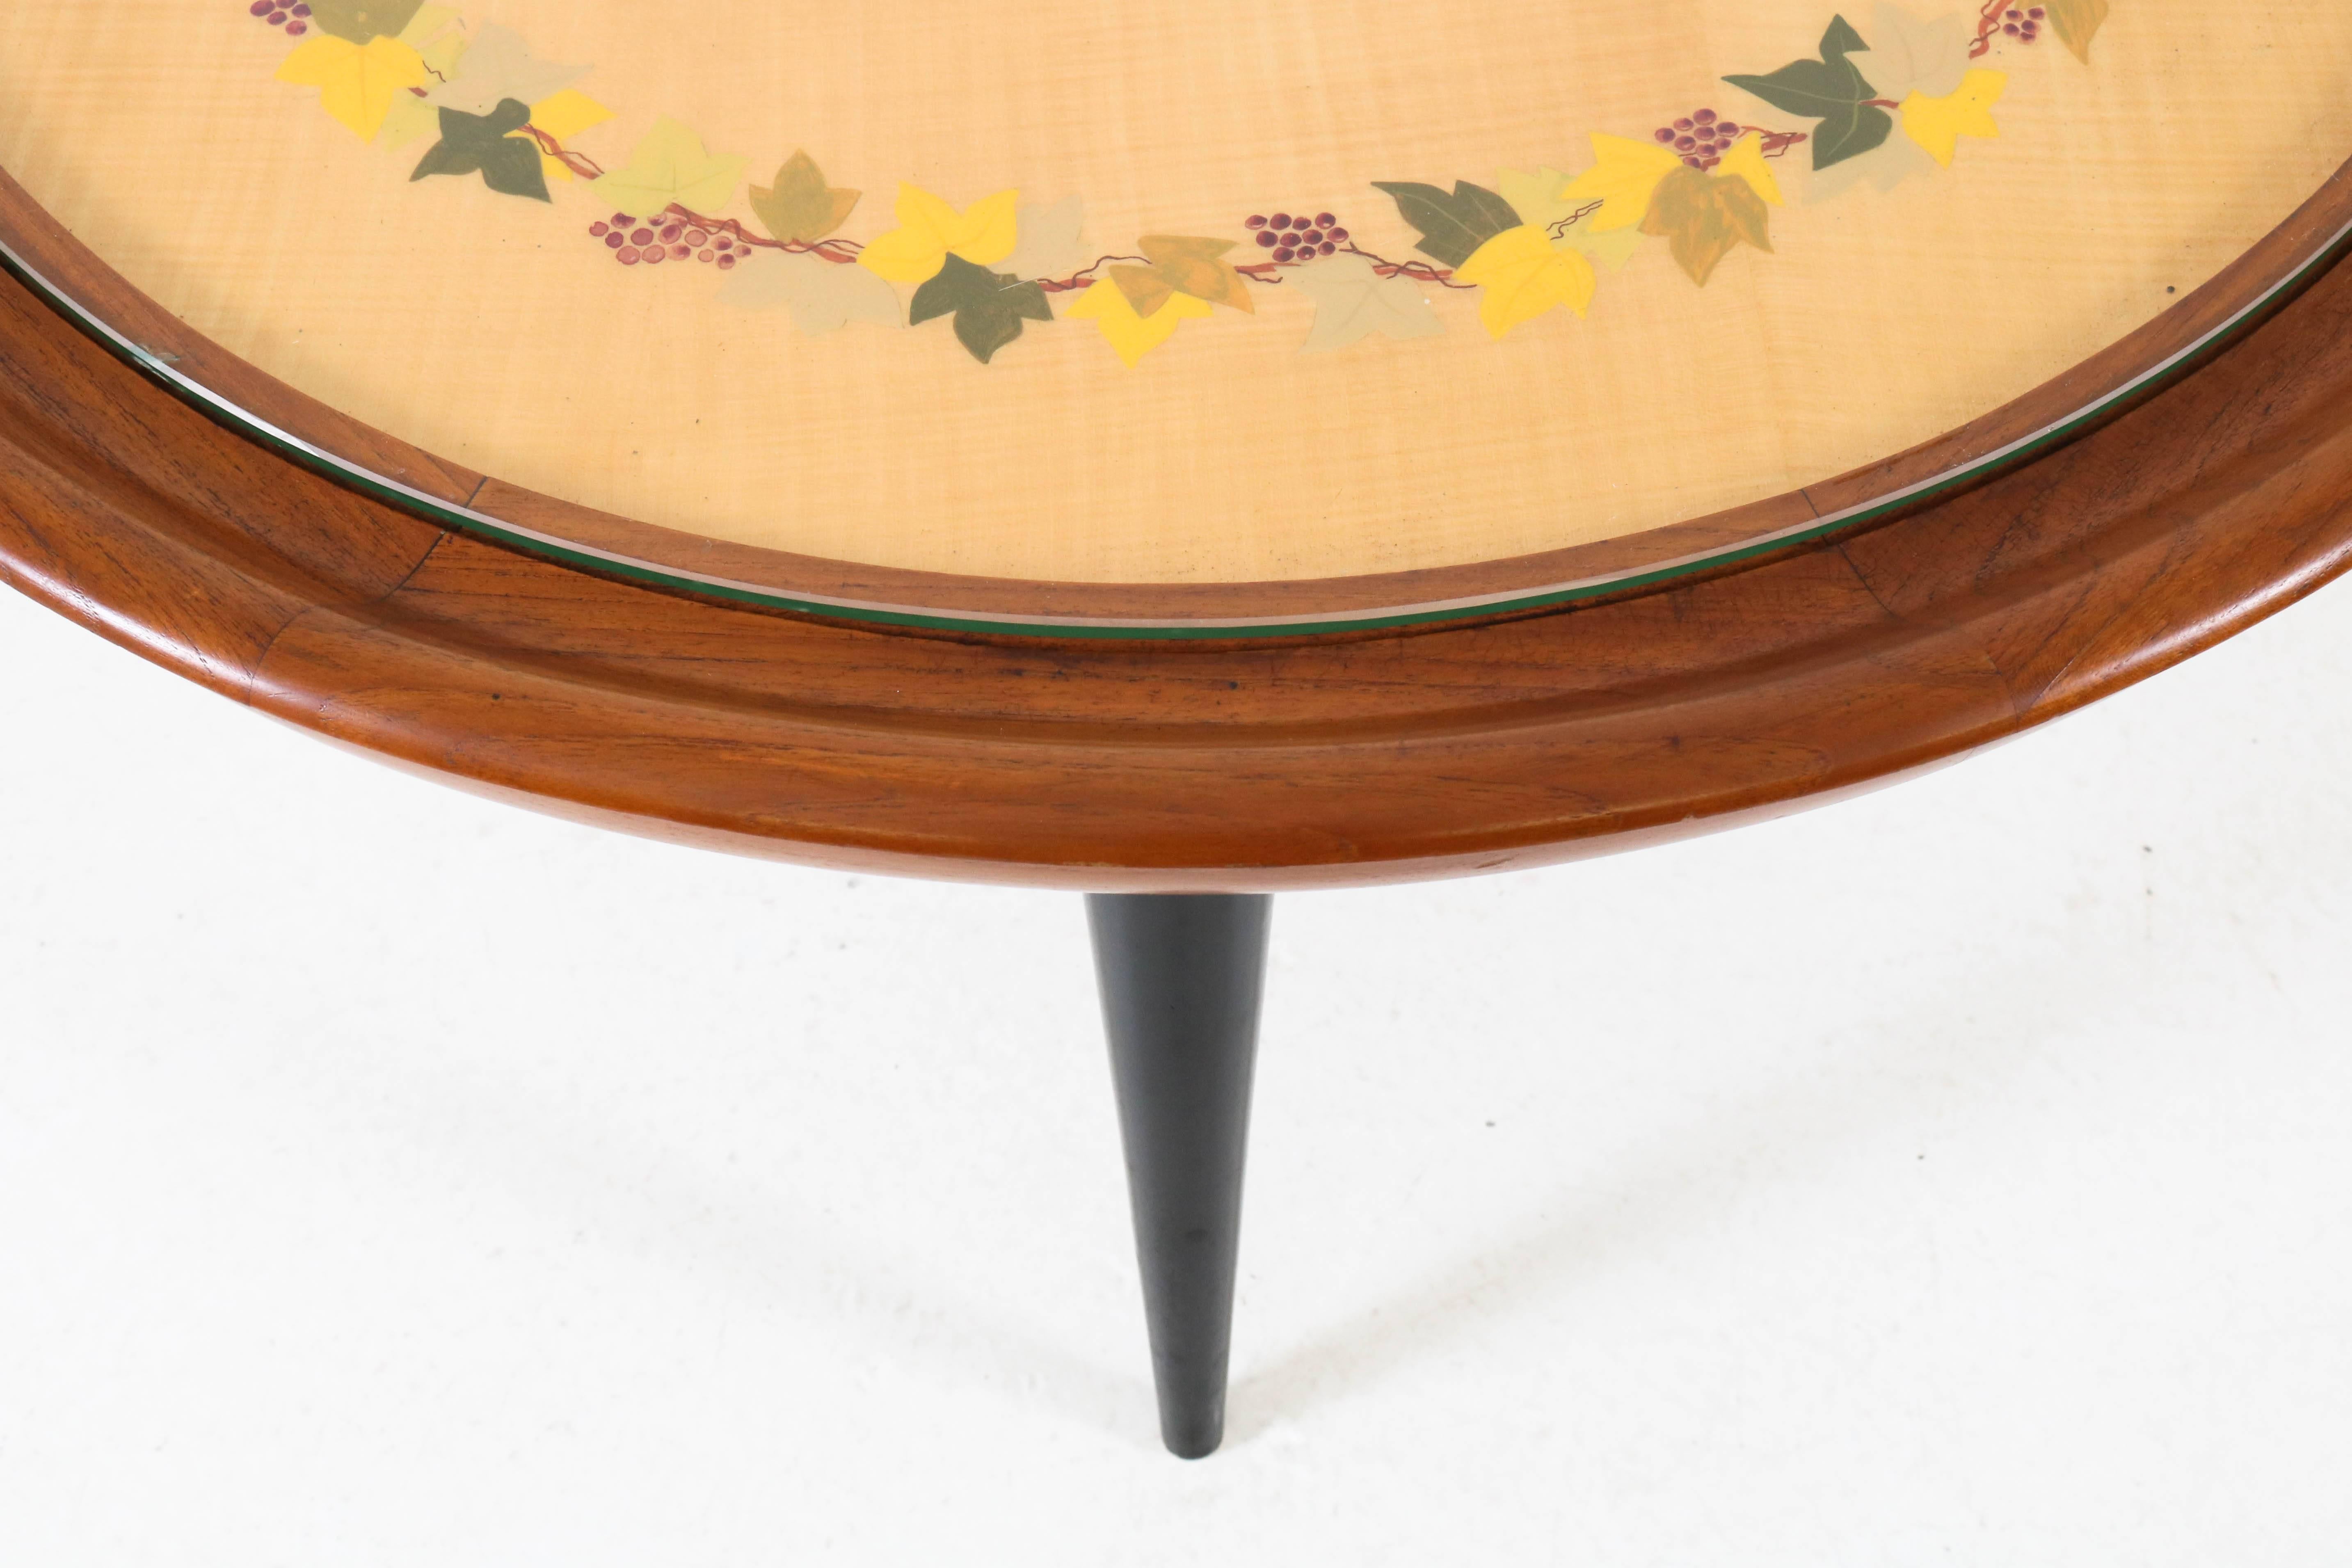 Mid-20th Century Italian Mid-Century Modern Fruitwood Coffee Table with Inlay, 1950s For Sale